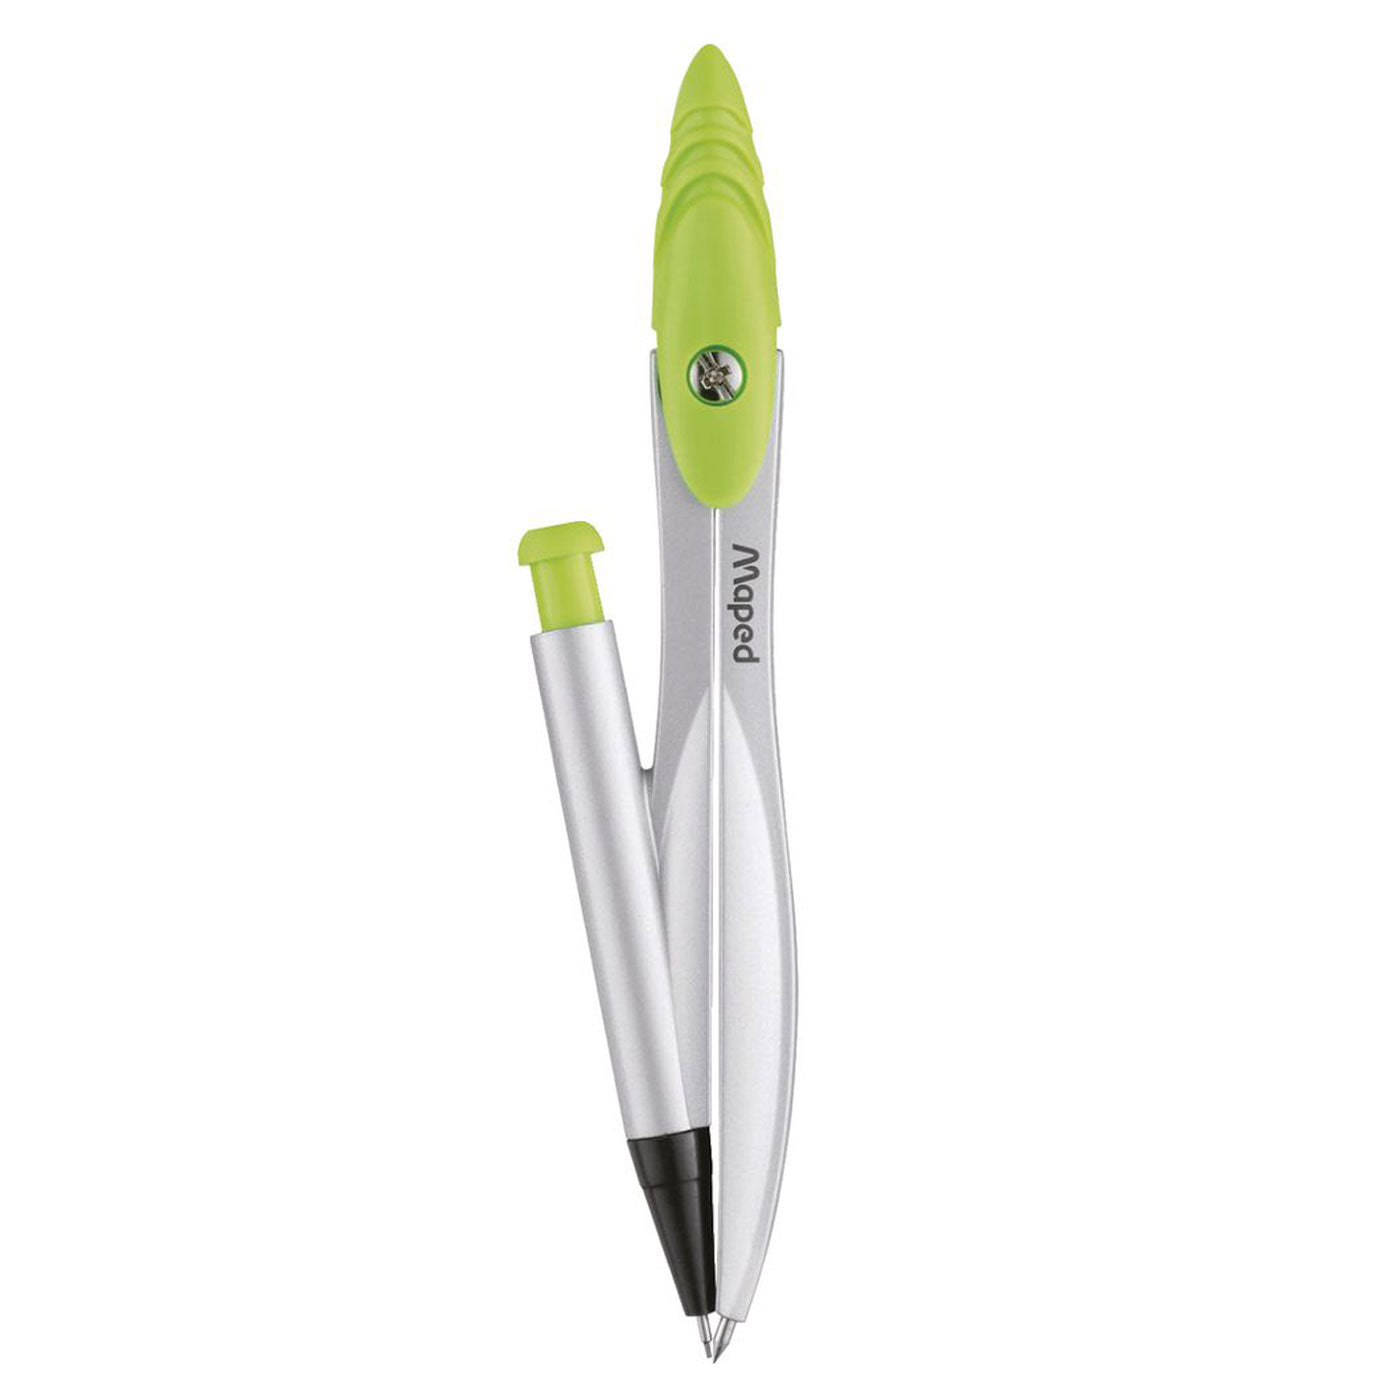 Maped-Study-Compass-Metal-with-0.5mm-Mechanical-Pencil-Green